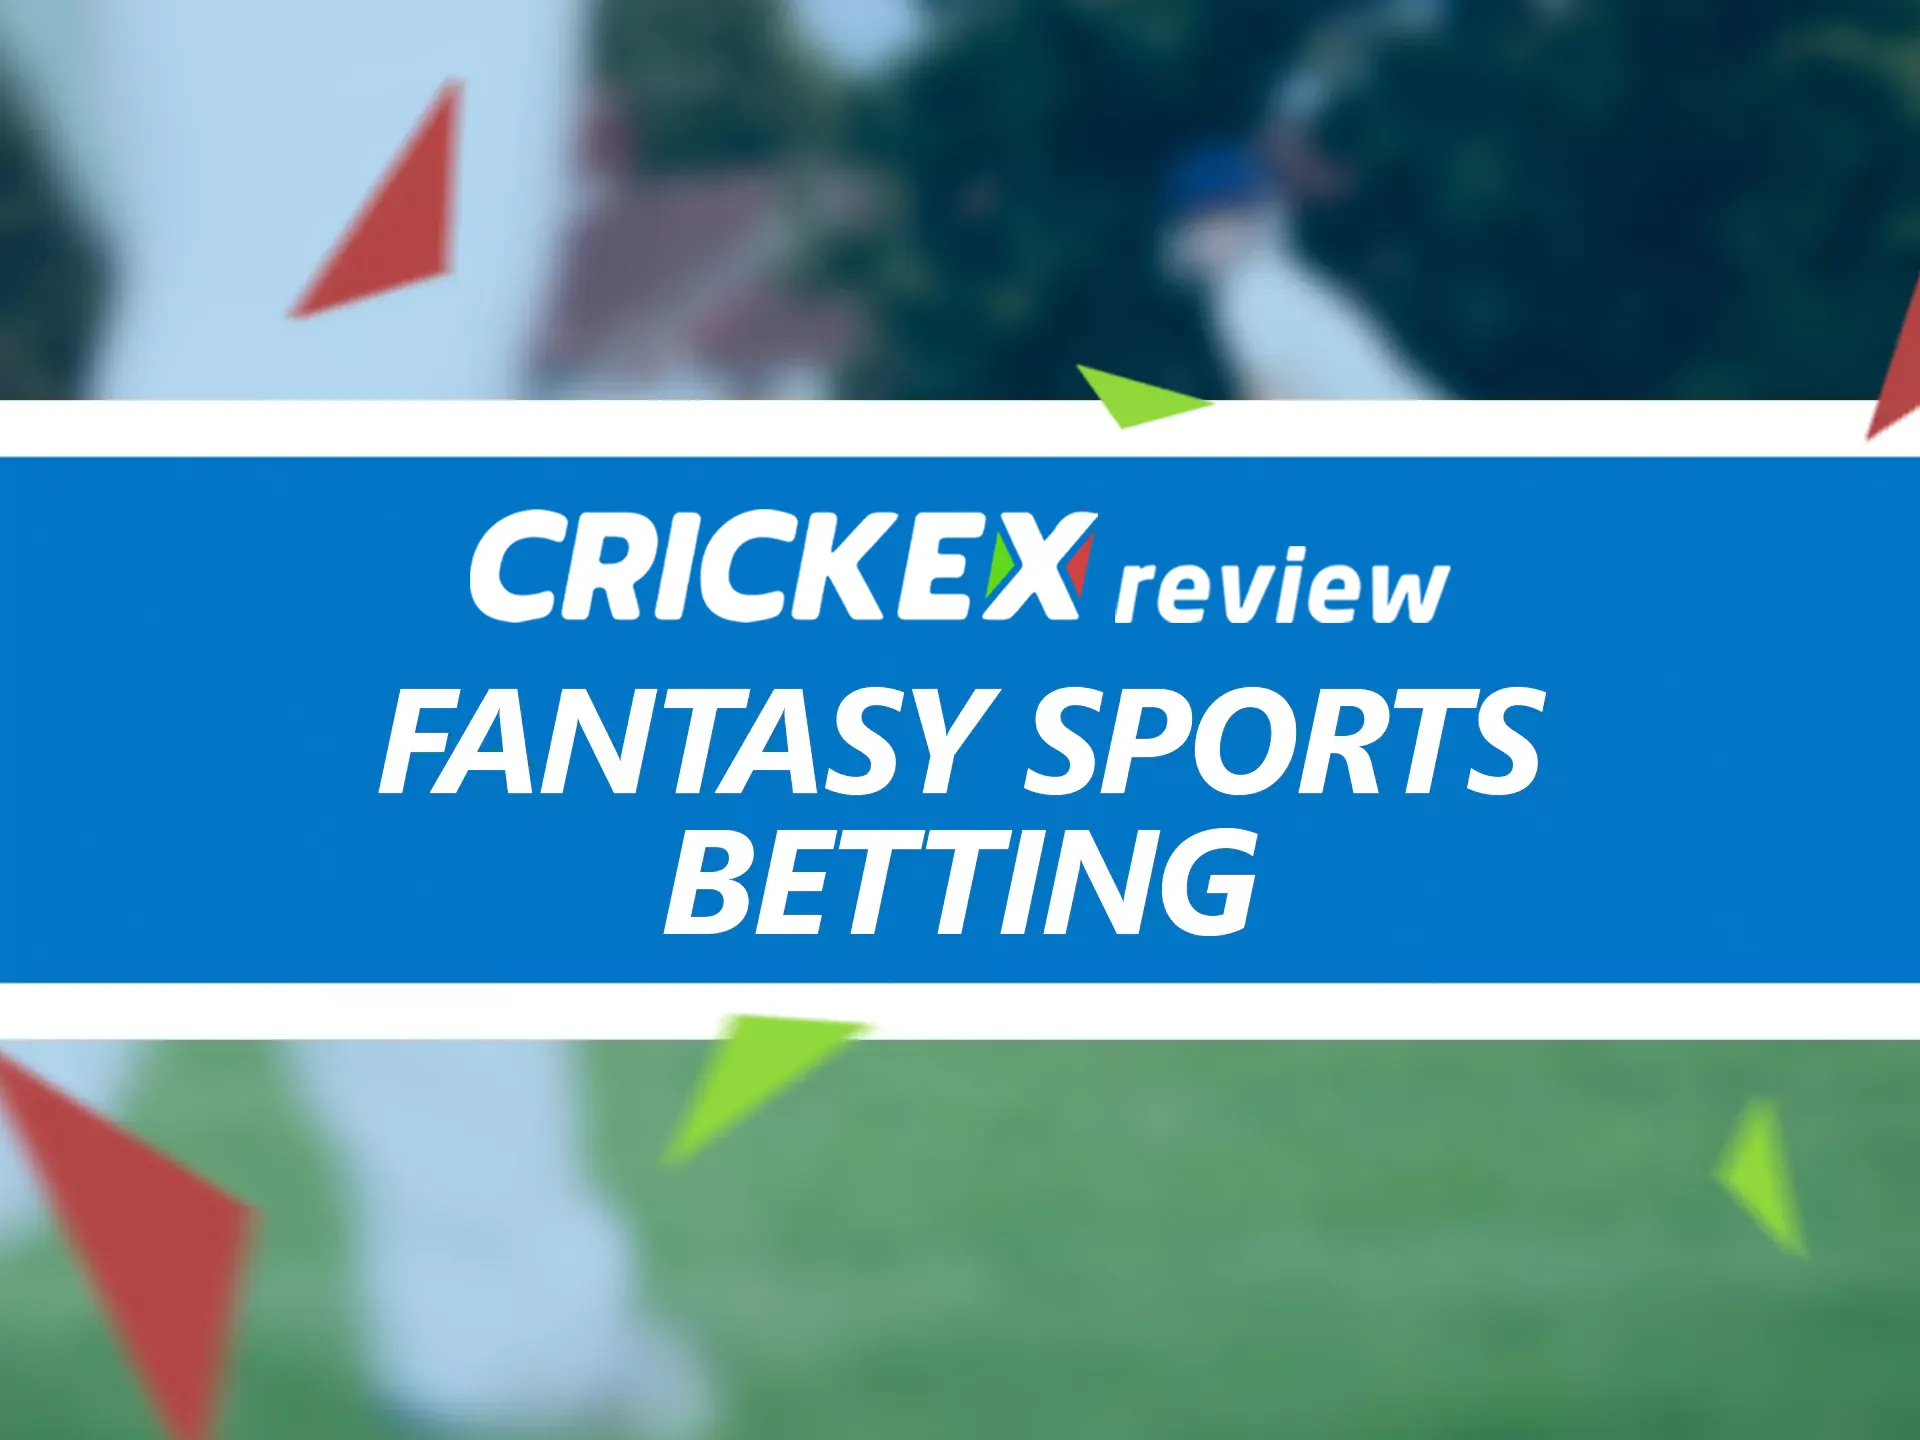 Indian users can bet on fantasy sports on Crickex.